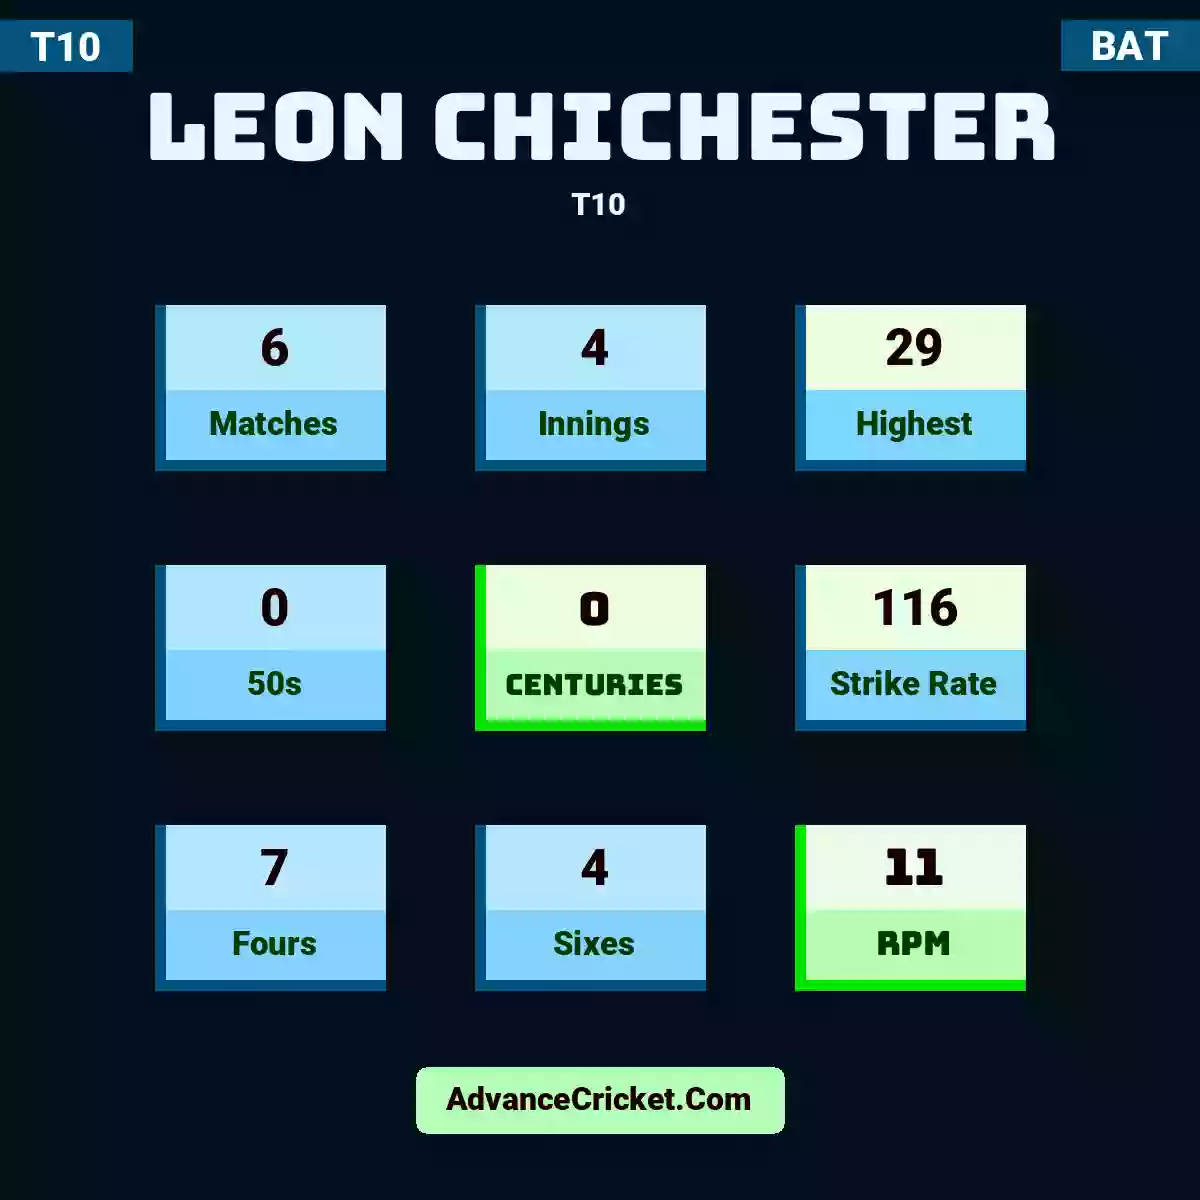 Leon Chichester T10 , Leon Chichester played 6 matches, scored 29 runs as highest, 0 half-centuries, and 0 centuries, with a strike rate of 116. L.Chichester hit 7 fours and 4 sixes, with an RPM of 11.